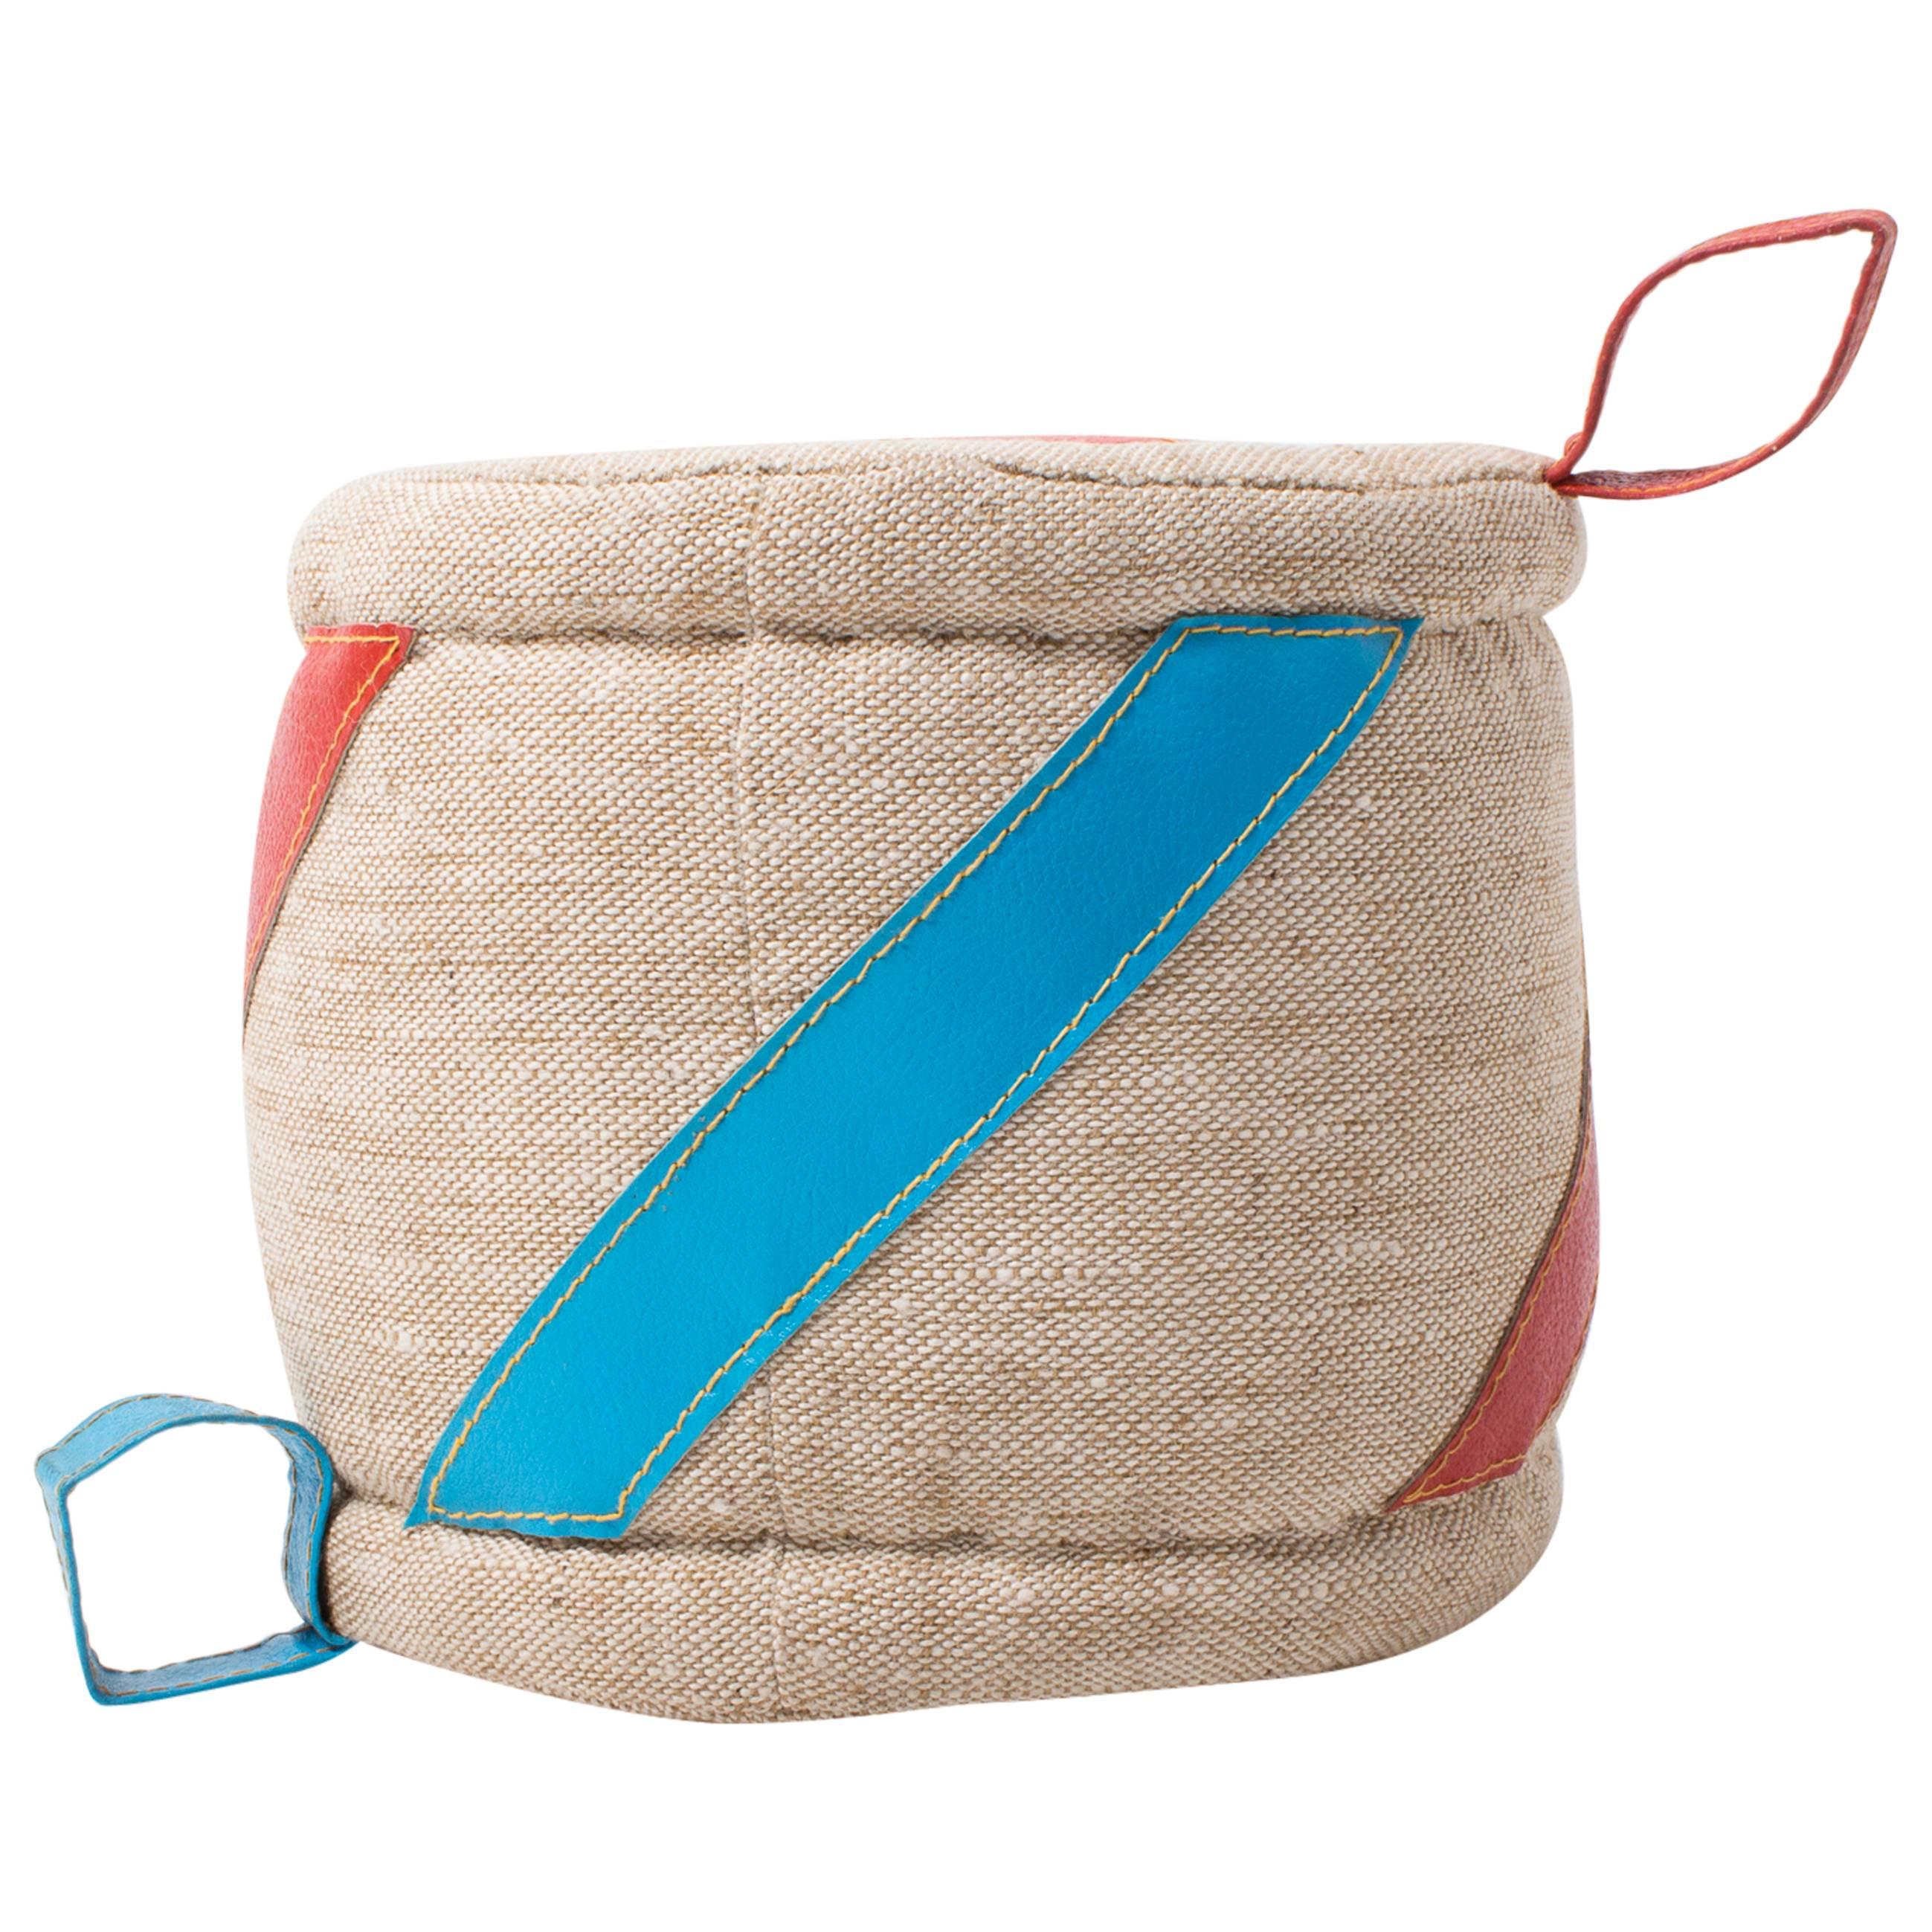 'Therapeutic Toy' Cylindrical Seat Cushion by Renate Müller Designed in 1968 For Sale